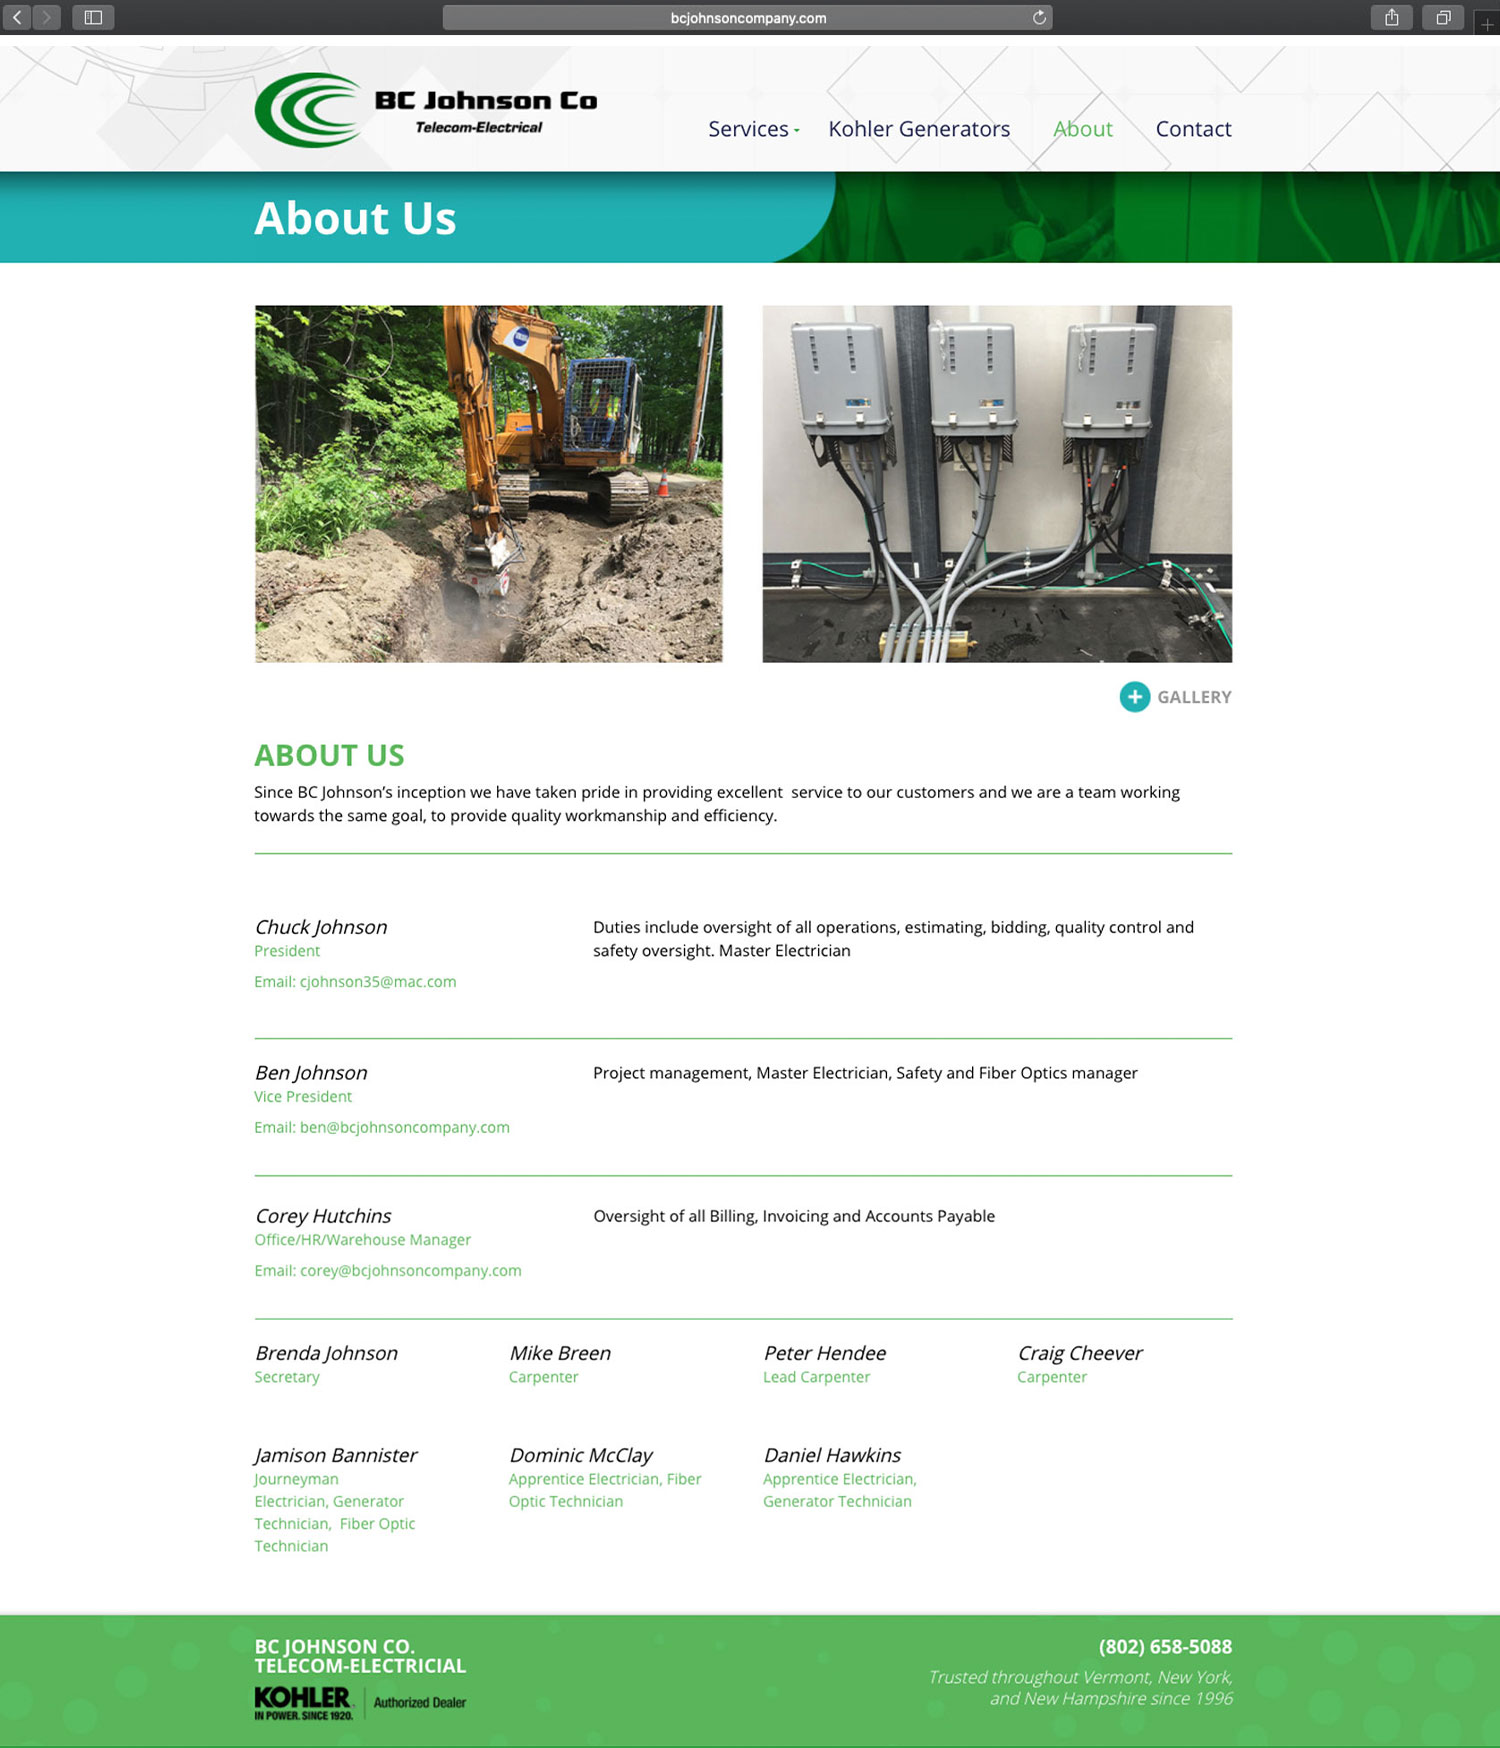 Website design and website development for B.C. Johnson - secondary page view.